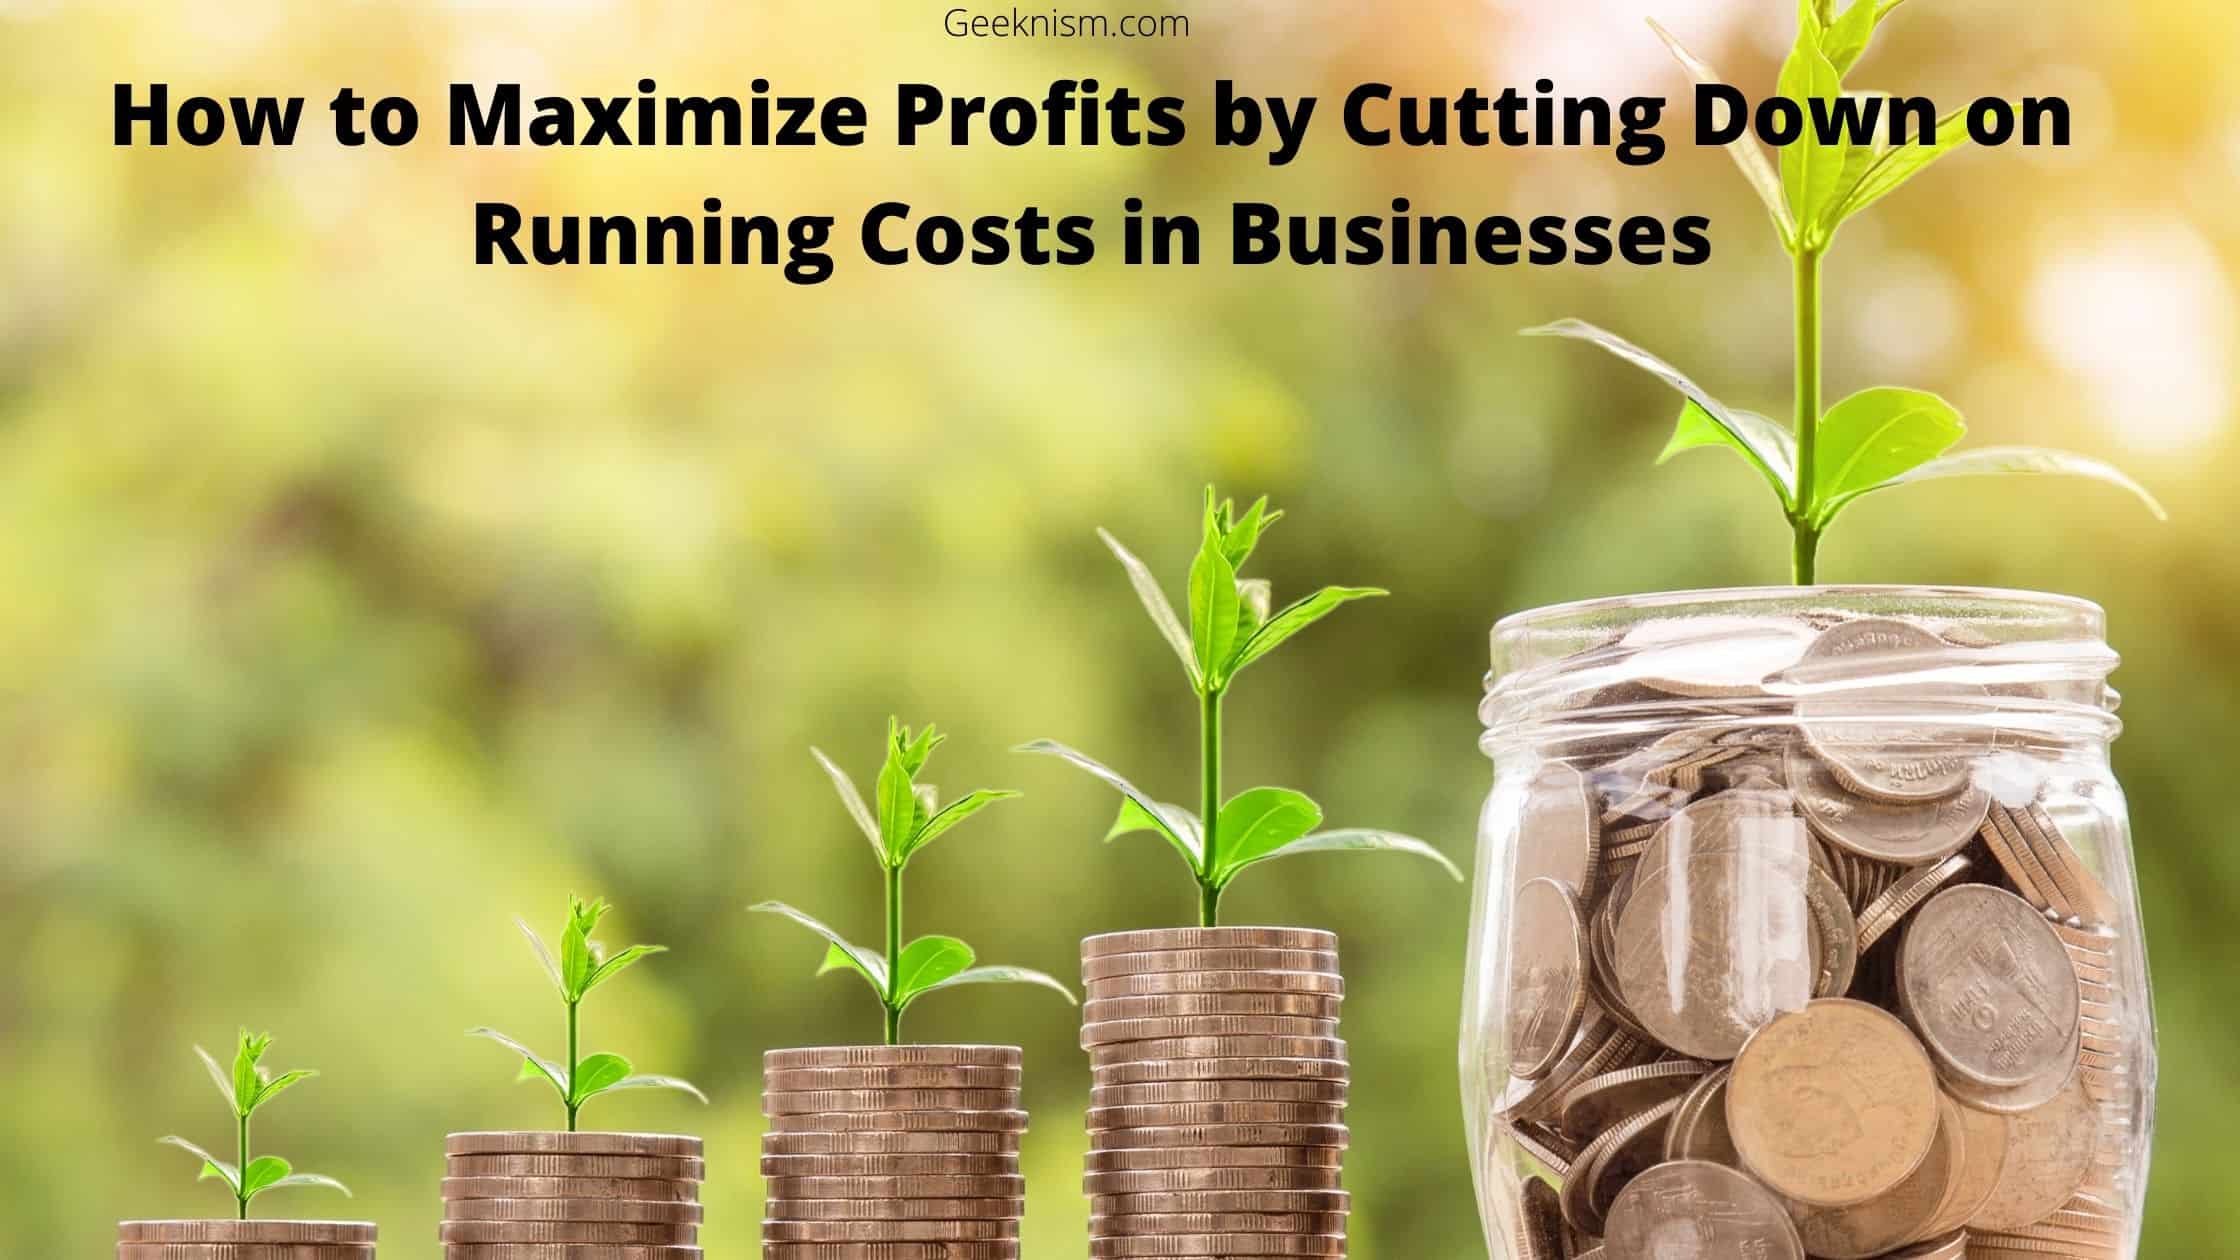 How to Maximize Profits by Cutting Down on Running Costs in Businesses